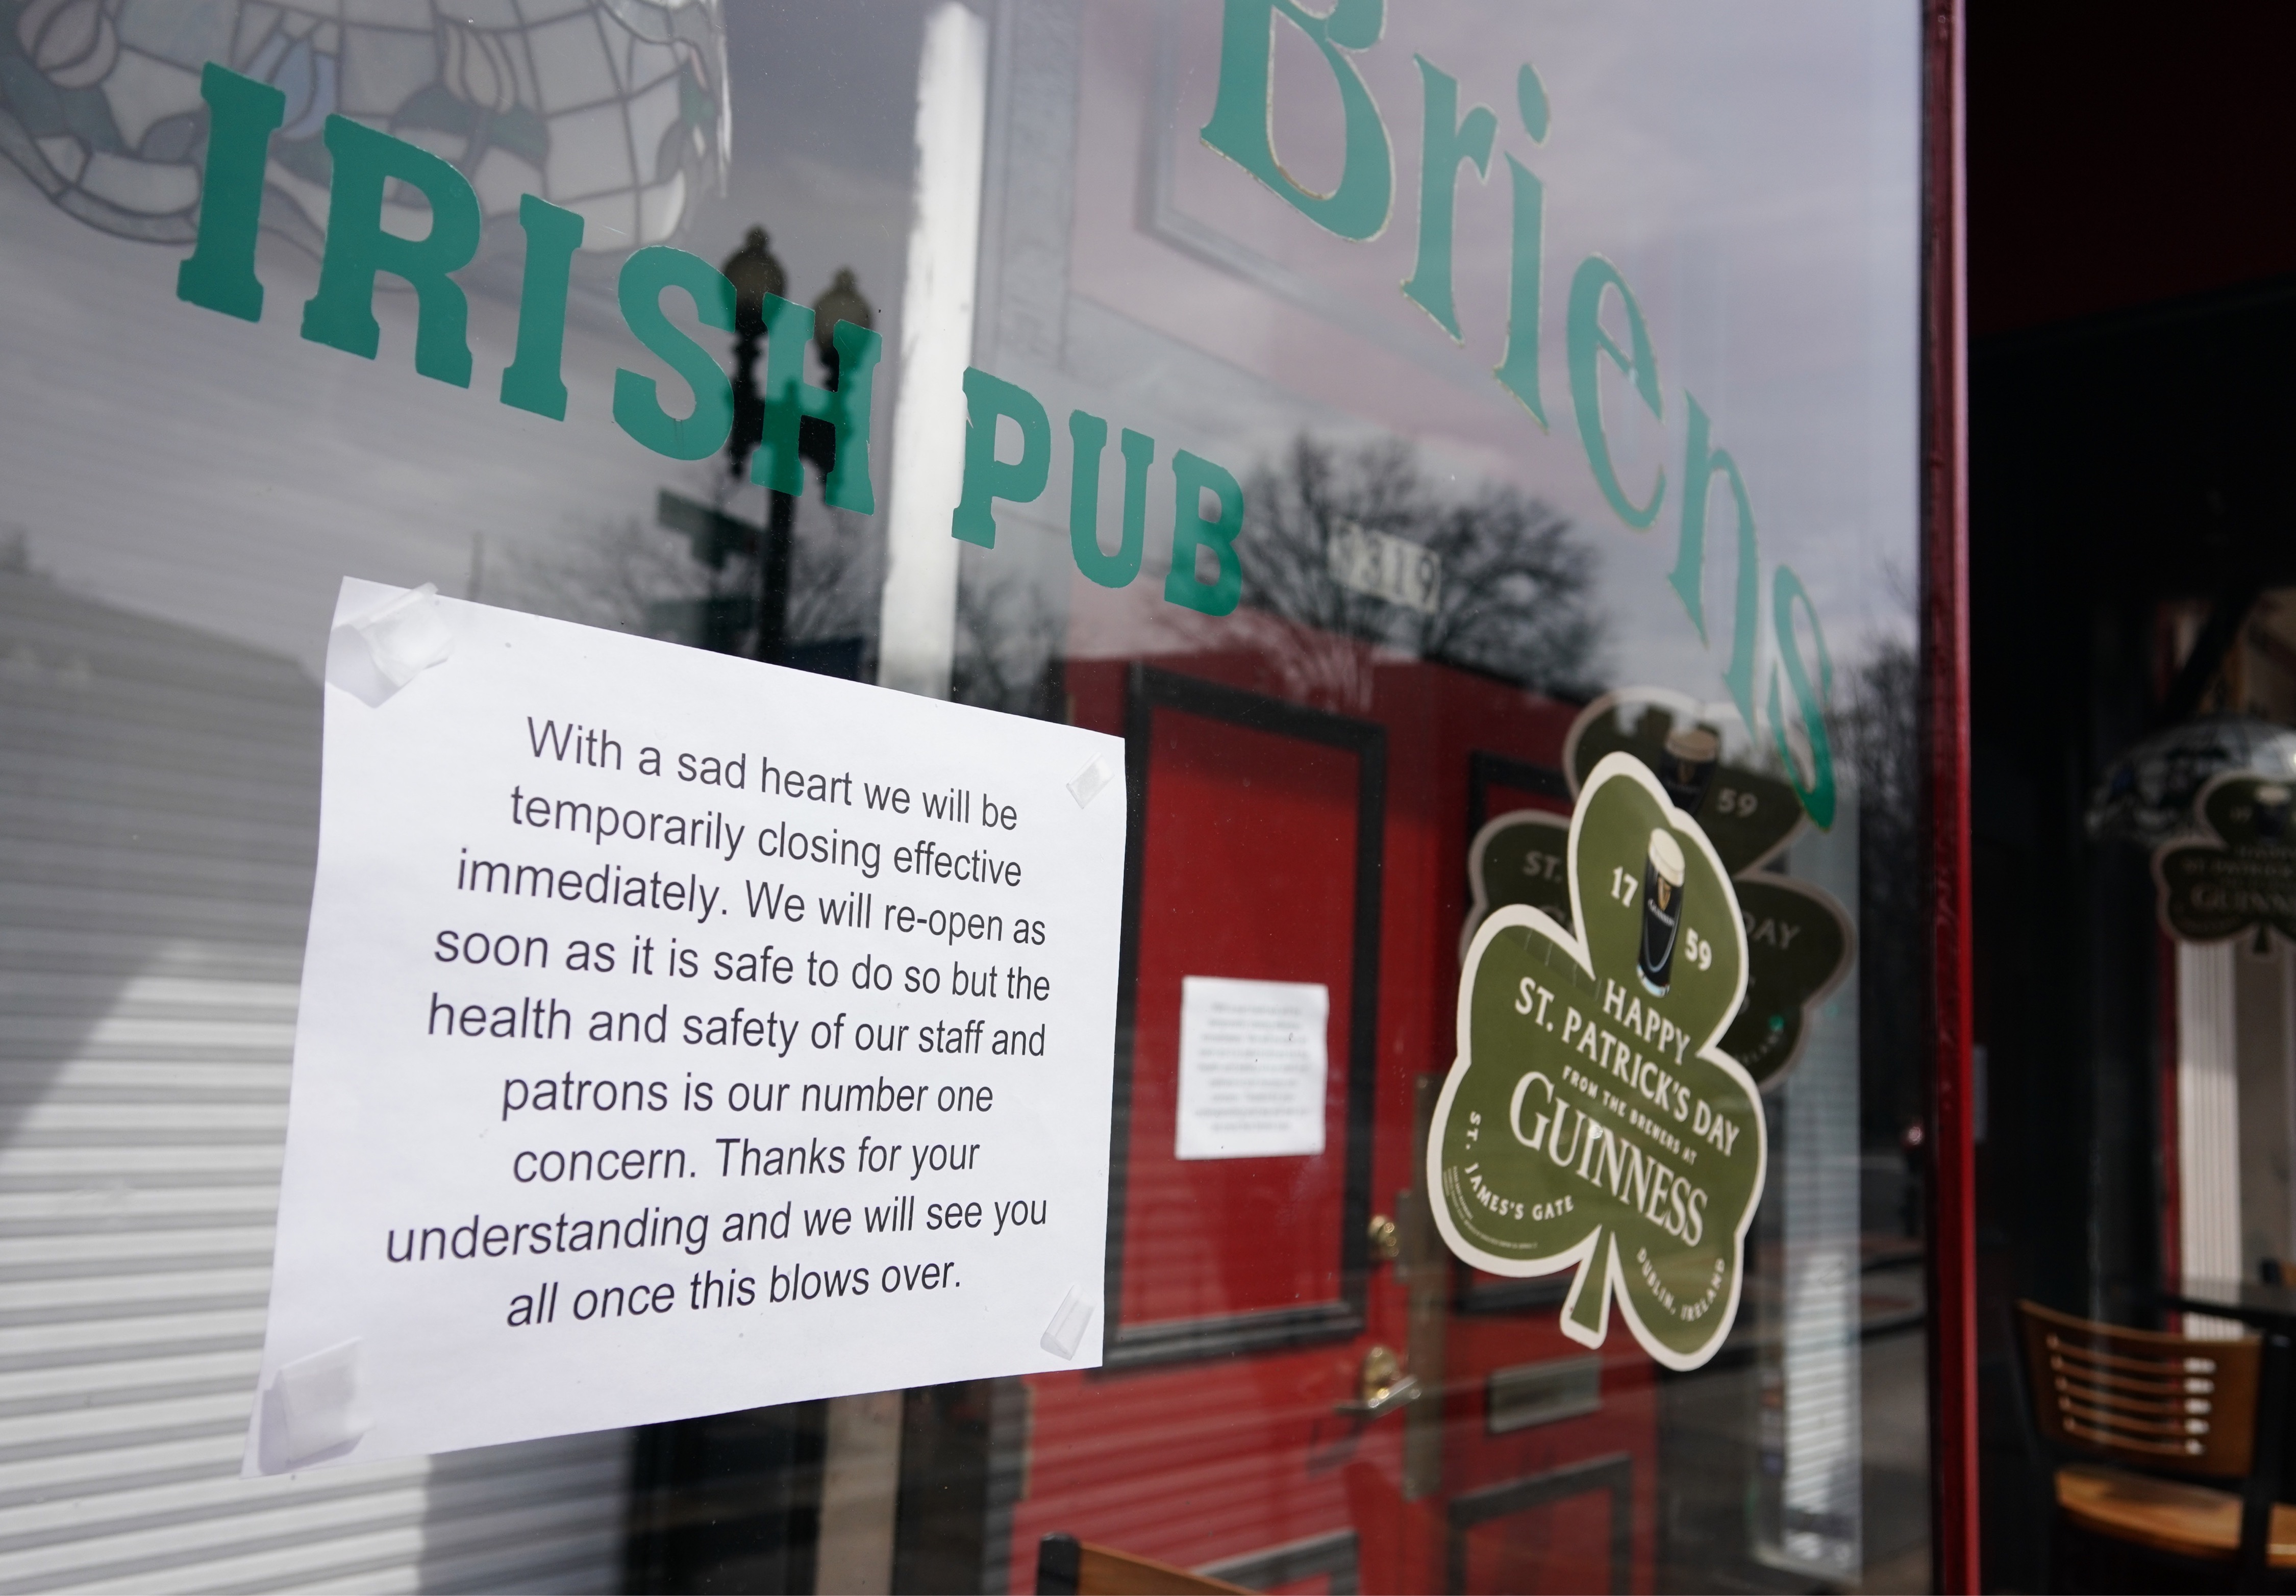 A sign outside of a pub announces its closure due to the coronavirus, COVID-19 in Washington, DC on March 16, 2020. - Stocks tumbled on March 16, 2020 despite emergency central bank measures to prop up the virus-battered global economy, as countries across Europe started the week in lockdown and major US cities shut bars and restaurants. The virus has upended society around the planet, with governments imposing restrictions rarely seen outside wartime, including the closing of borders, home quarantine orders and the scrapping of public events including major sporting fixtures. (Photo by Mandel Ngan / AFP) (Photo by MANDEL NGAN/AFP via Getty Images)